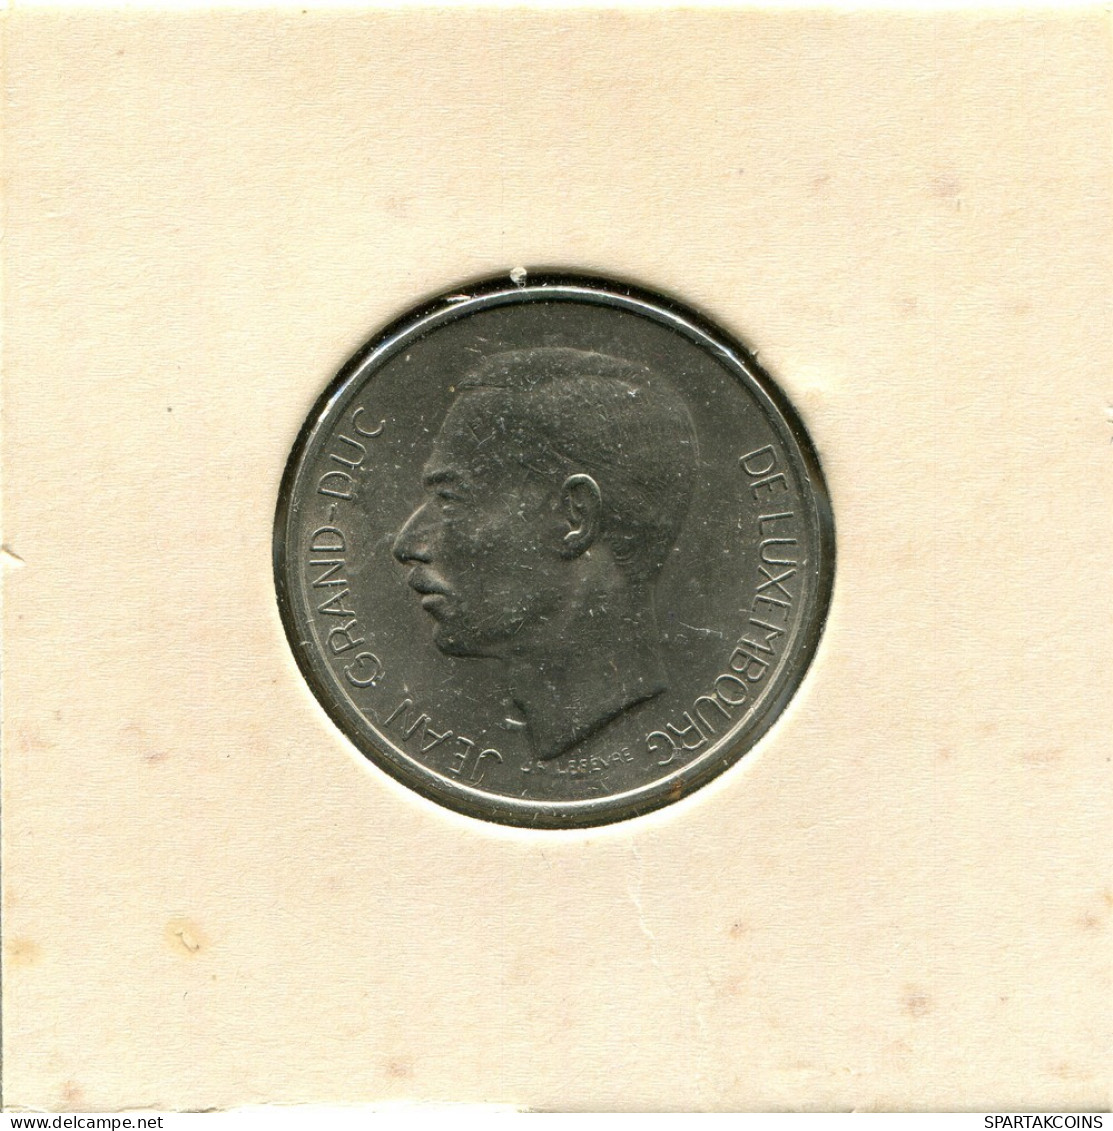 5 FRANCS 1971 LUXEMBURGO LUXEMBOURG Moneda #AT229.E.A - Luxemburg